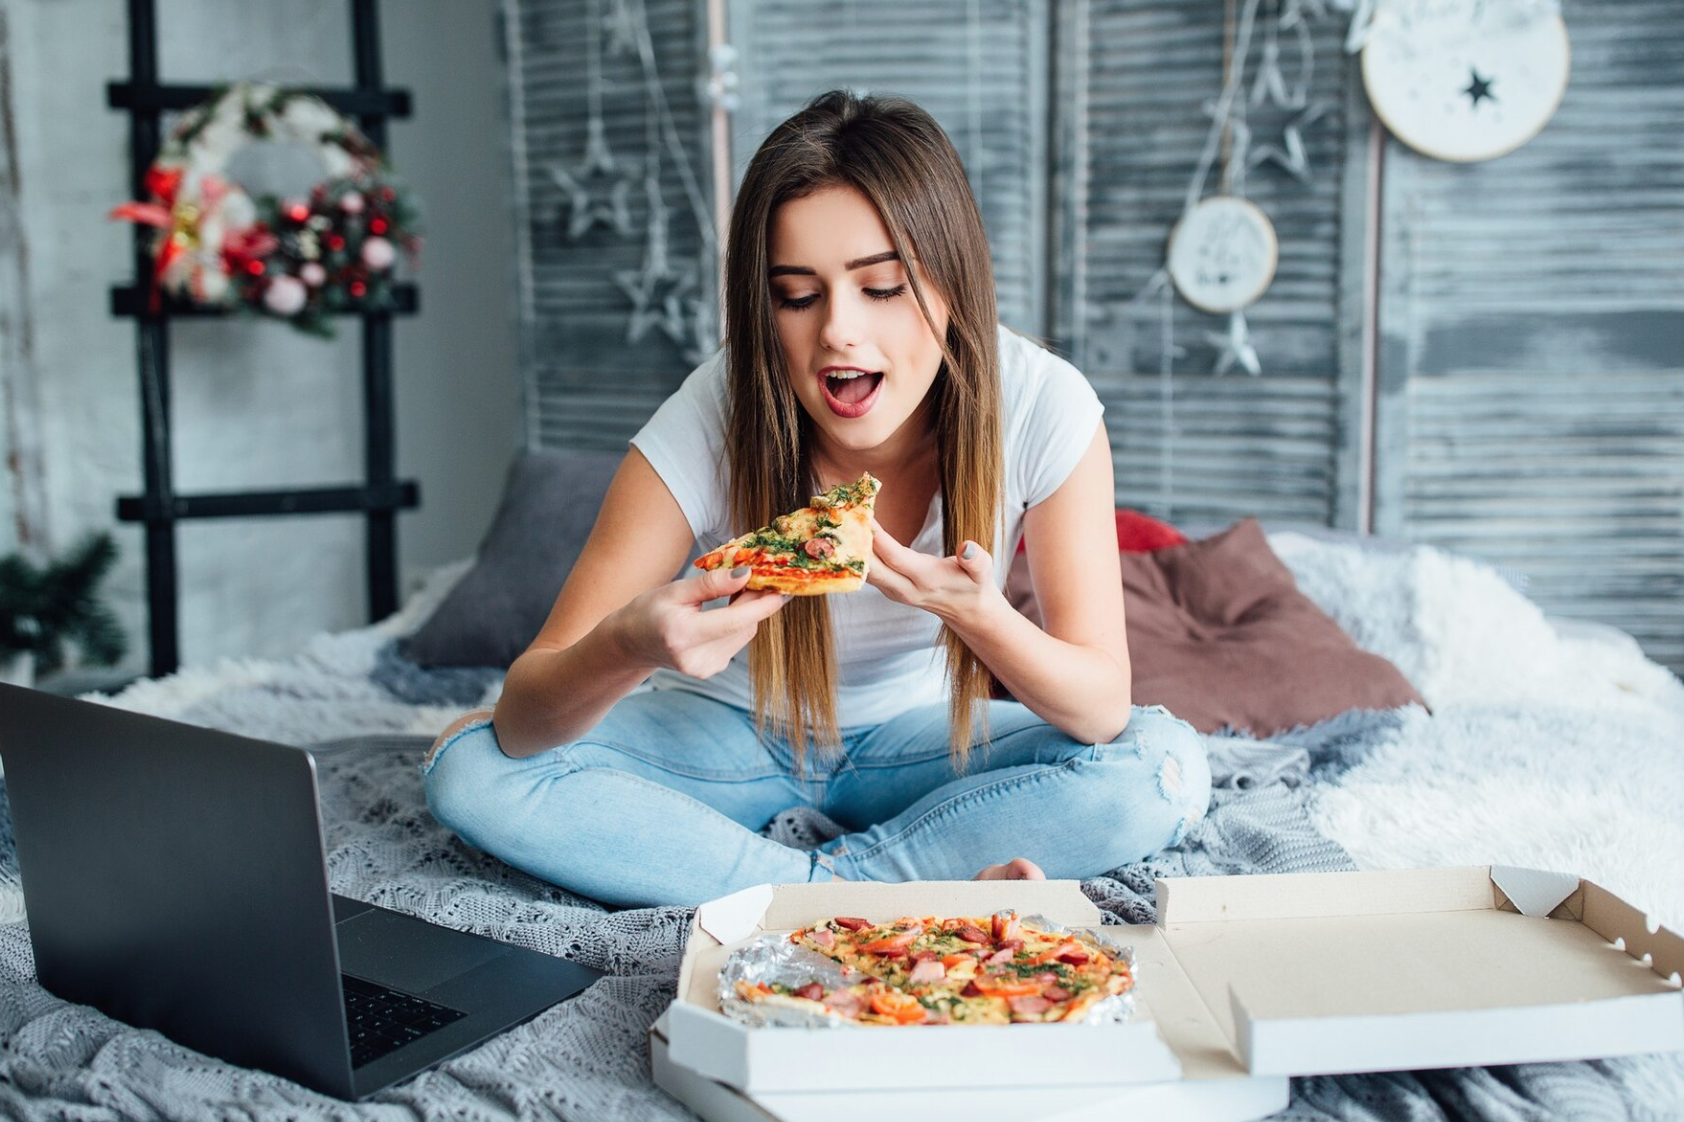 Can You Eat Pizza and Lose Weight?